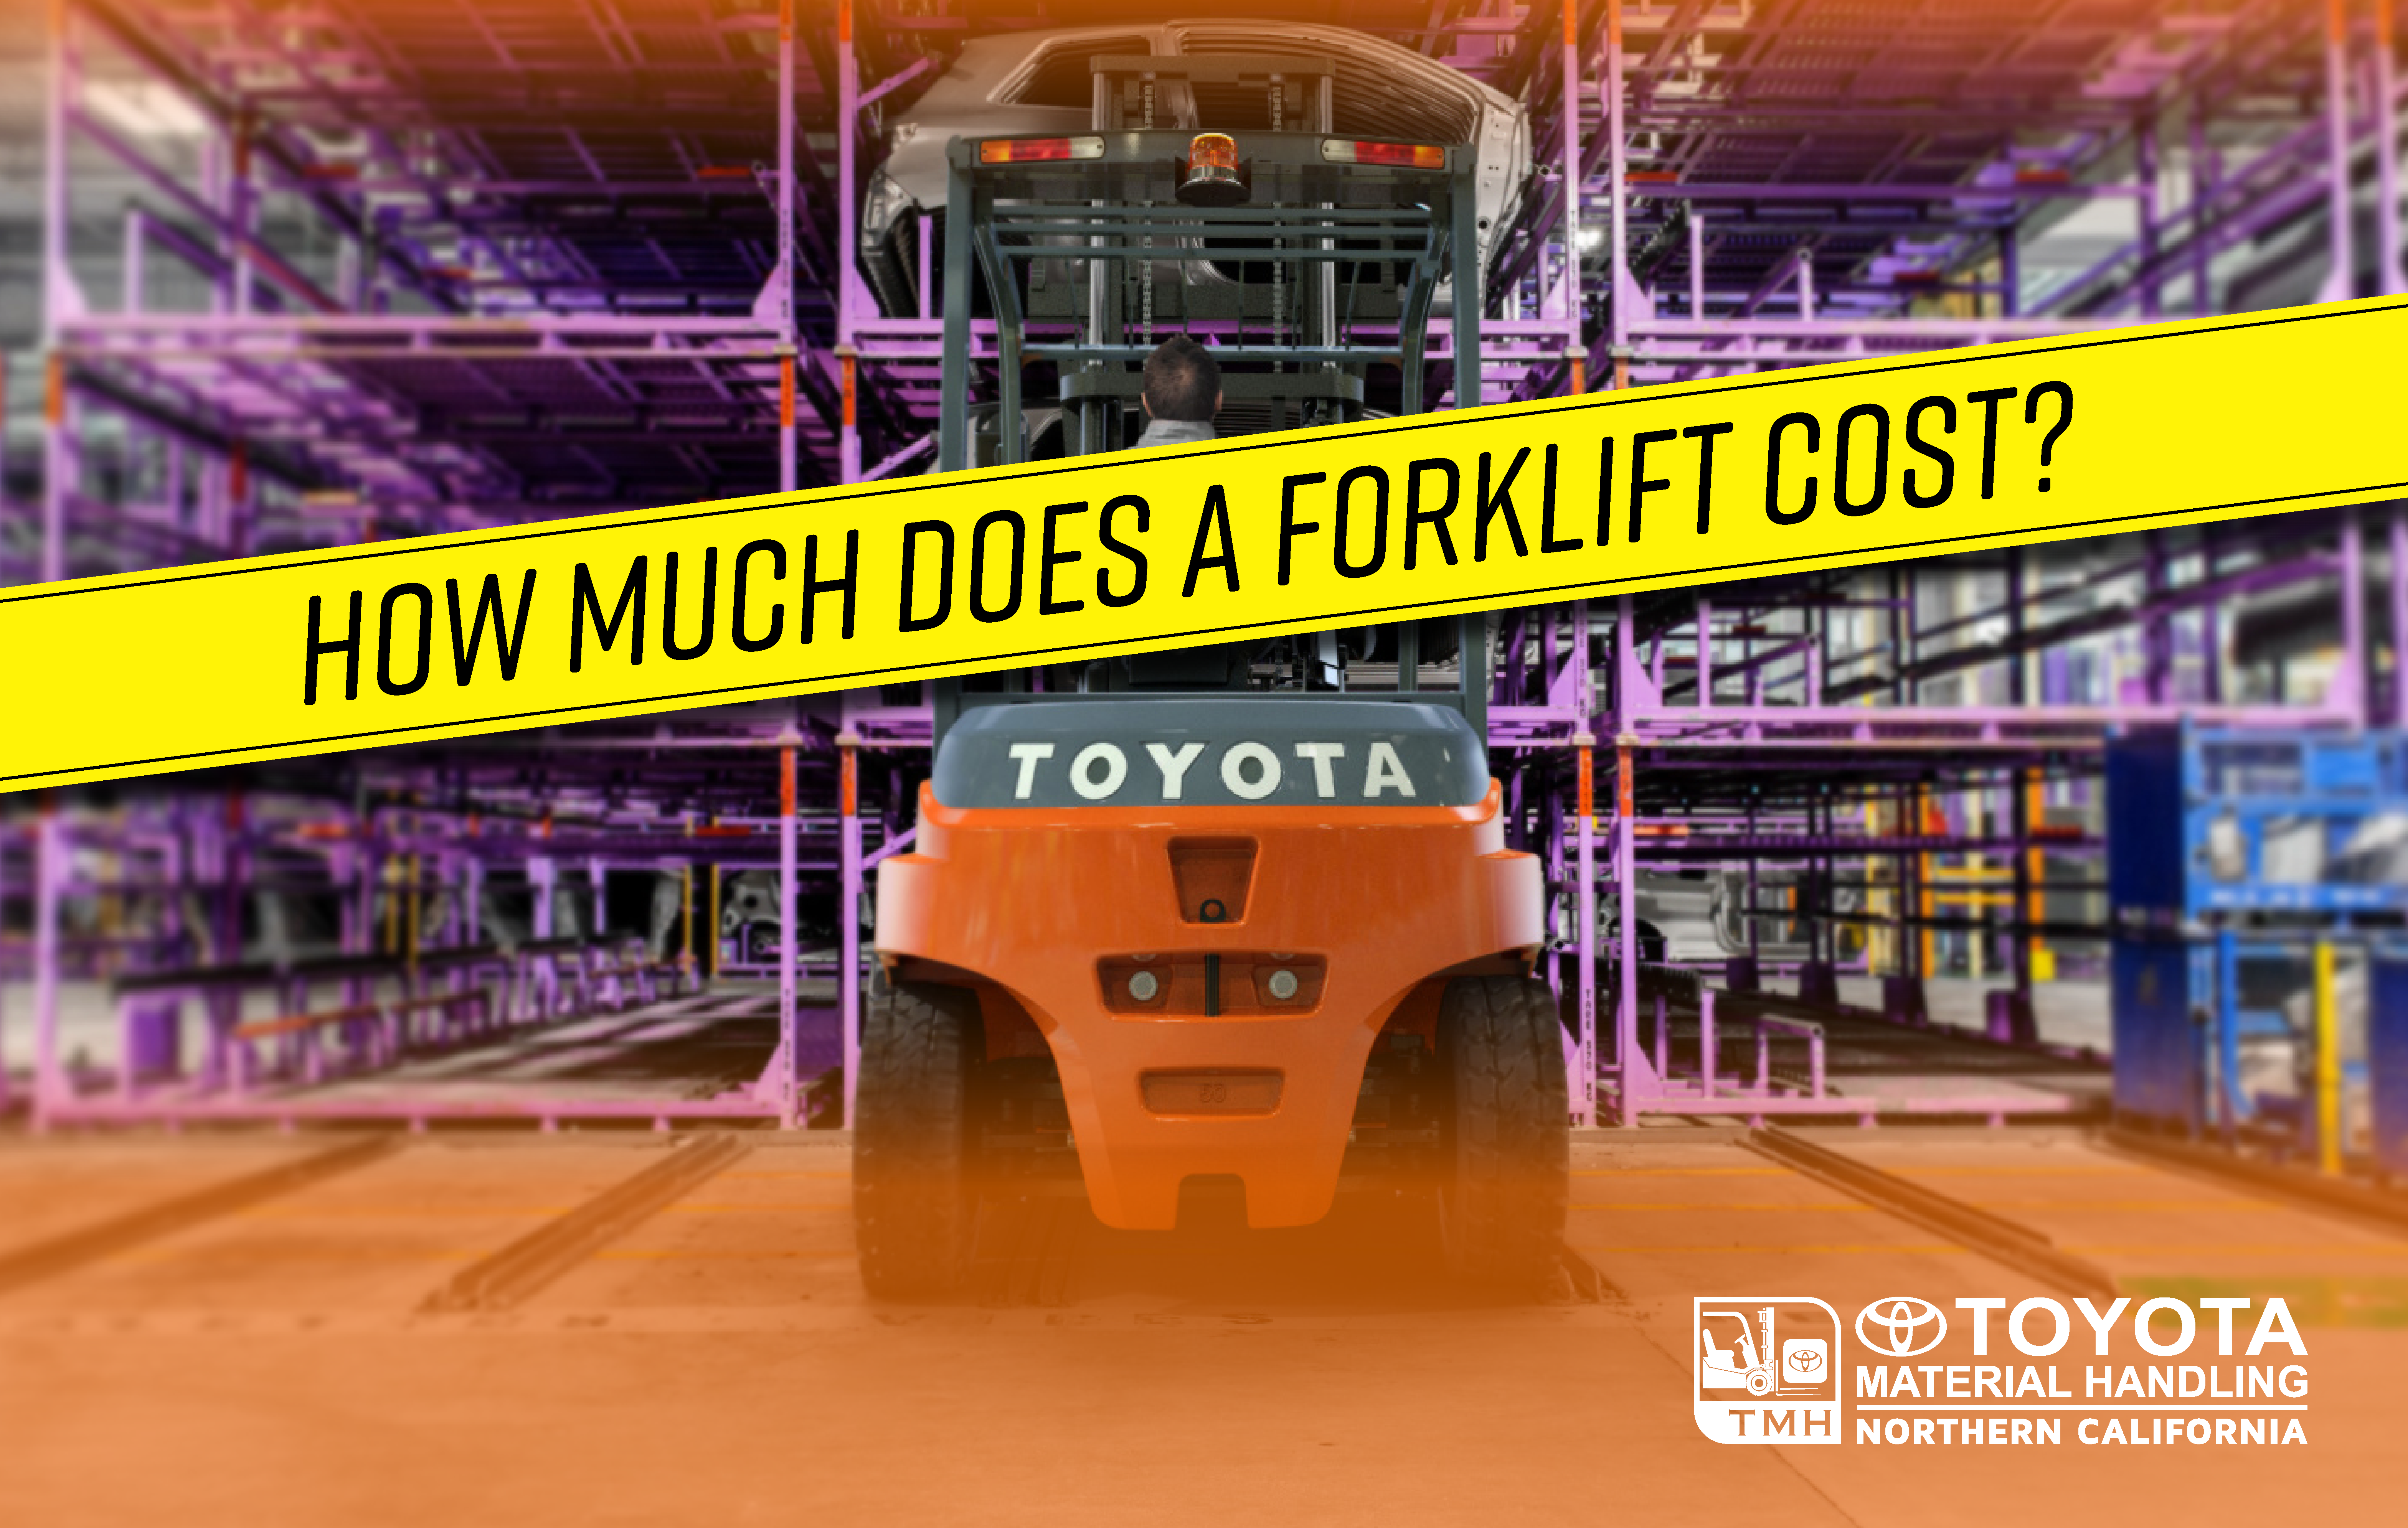 Forklift Cost